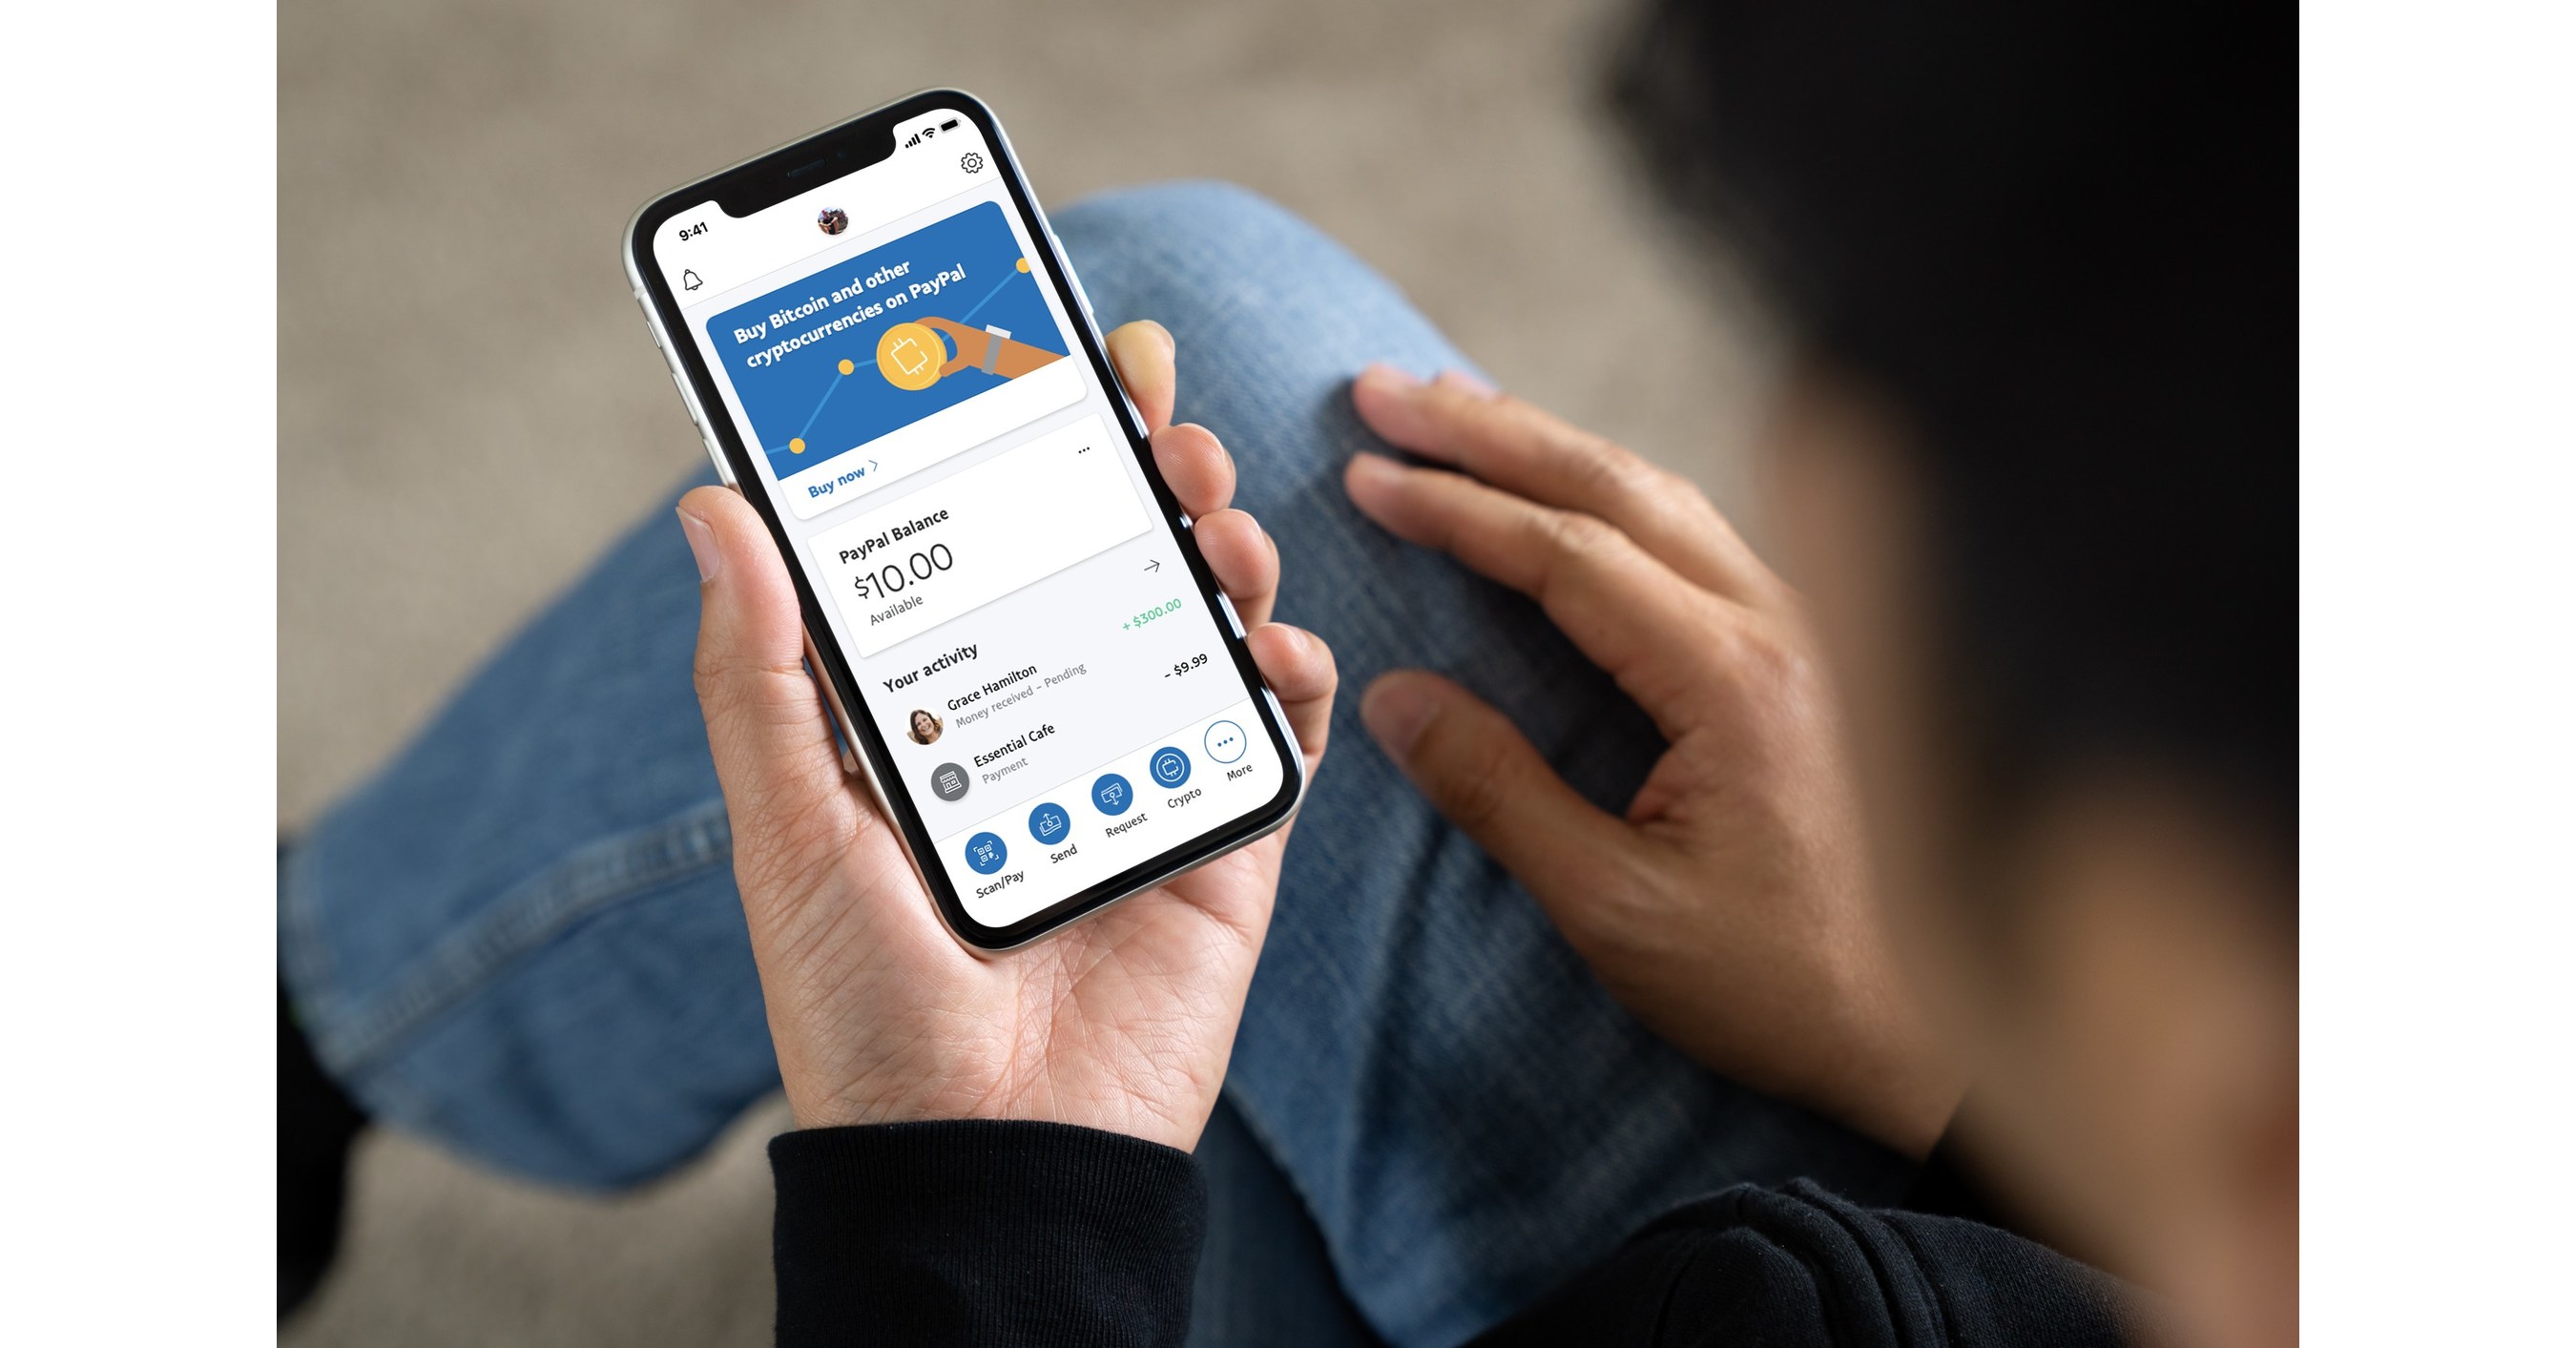 Press Release: PayPal Launches New Service Enabling Users to Buy, Hold and  Sell Cryptocurrency - Oct 21, 2020